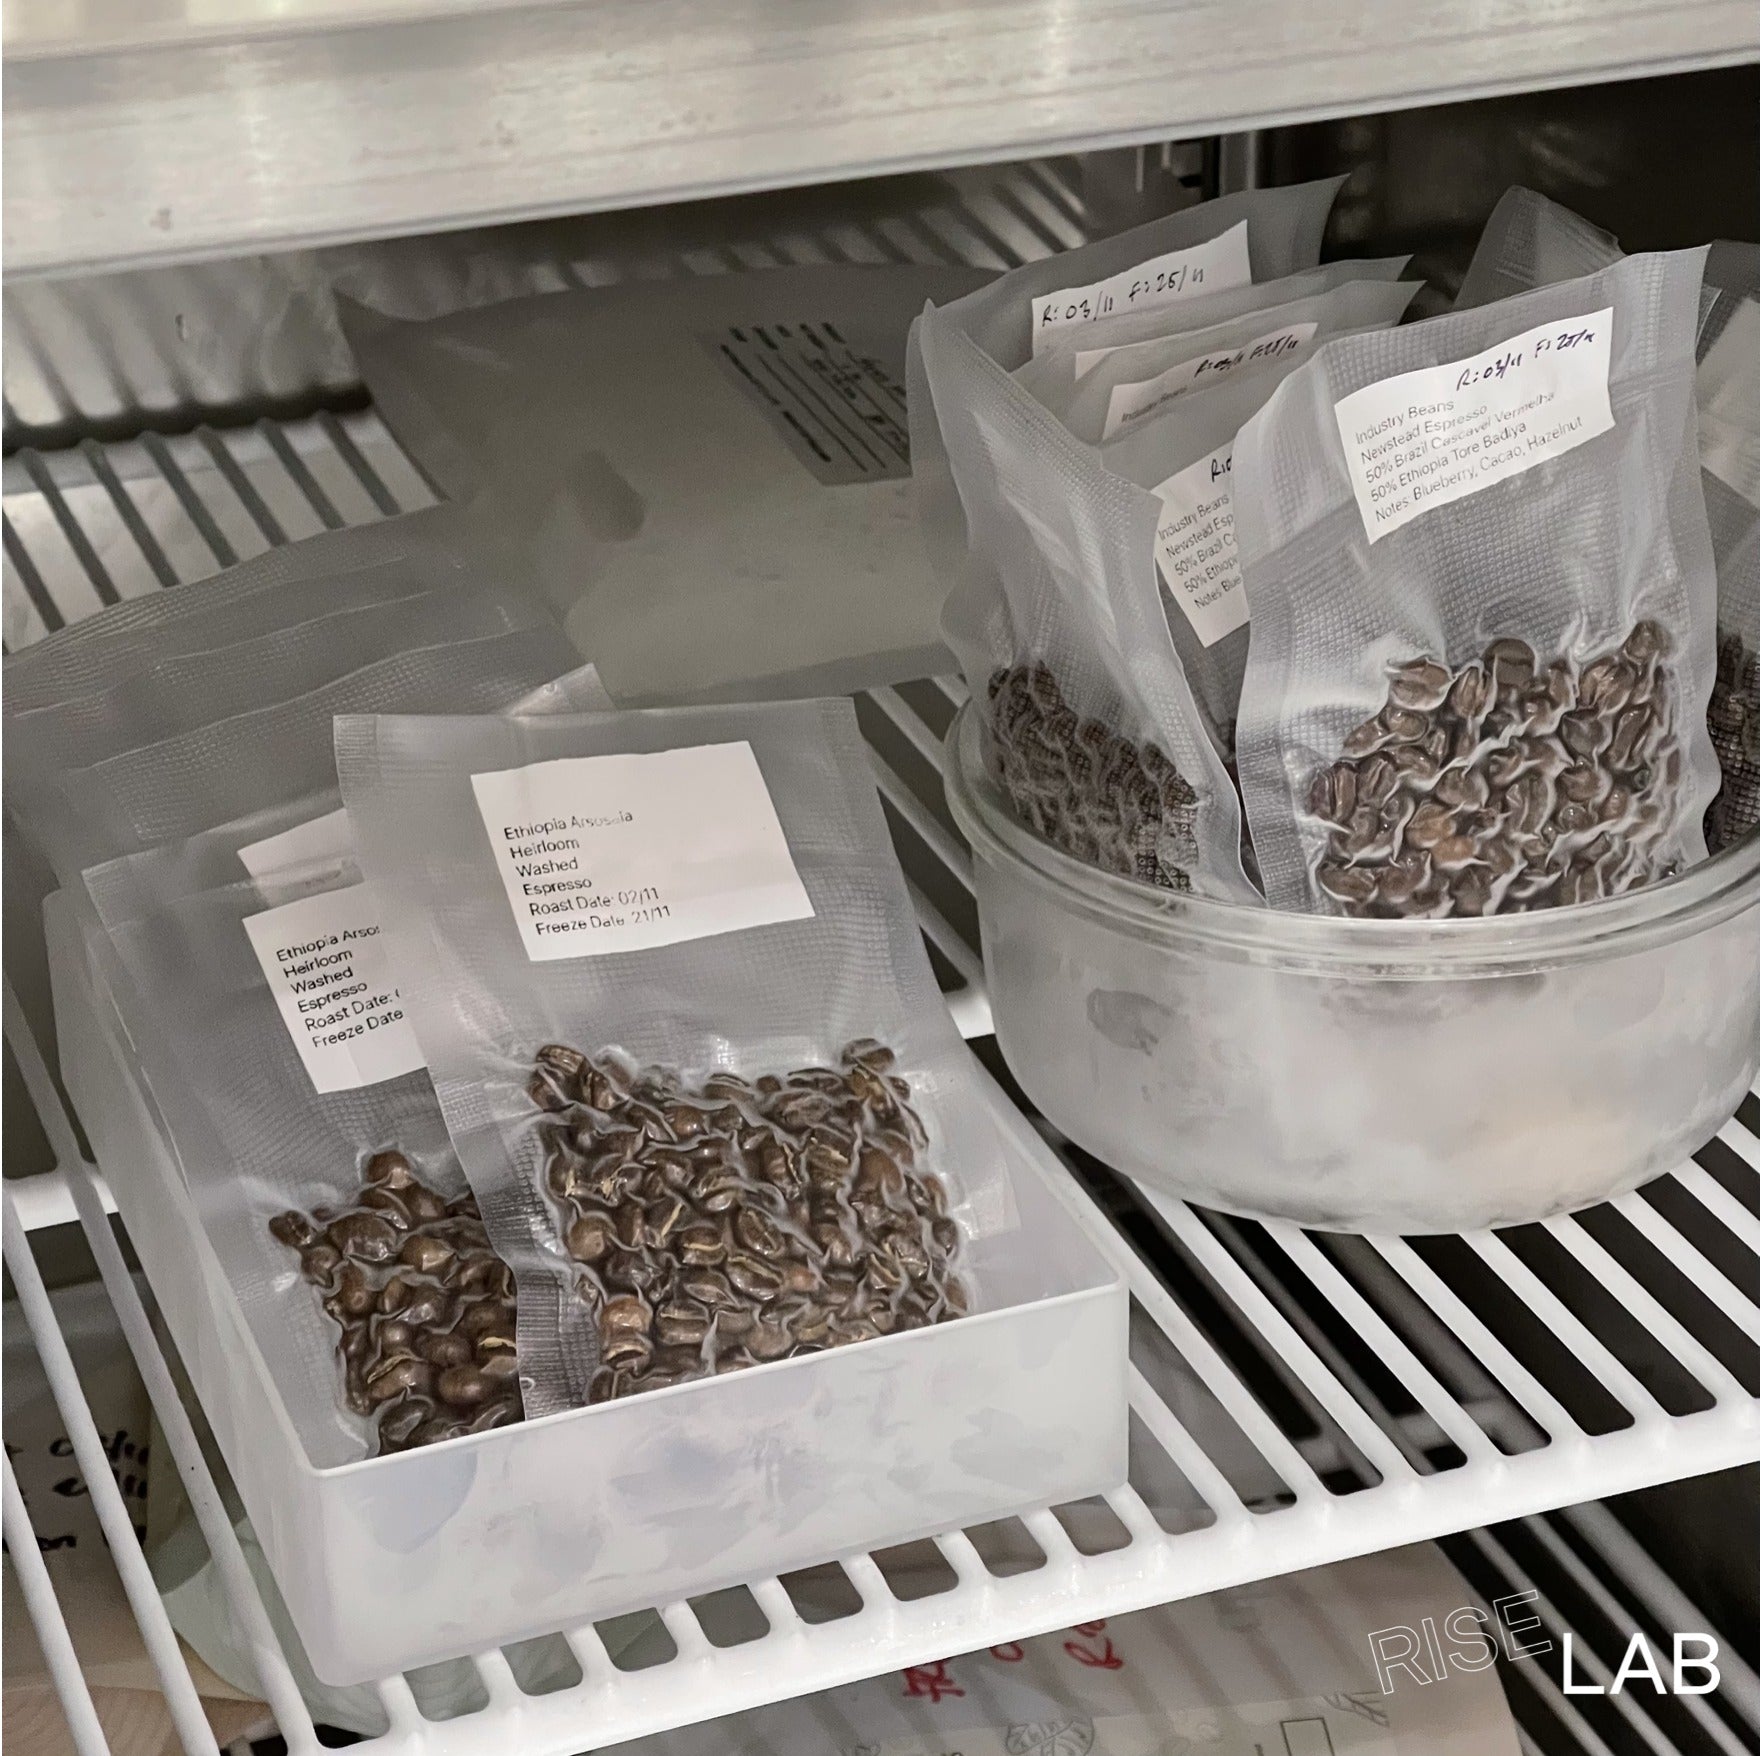 RISE LAB Diary: Why Freeze Coffee? What's Peak Flavor Window?